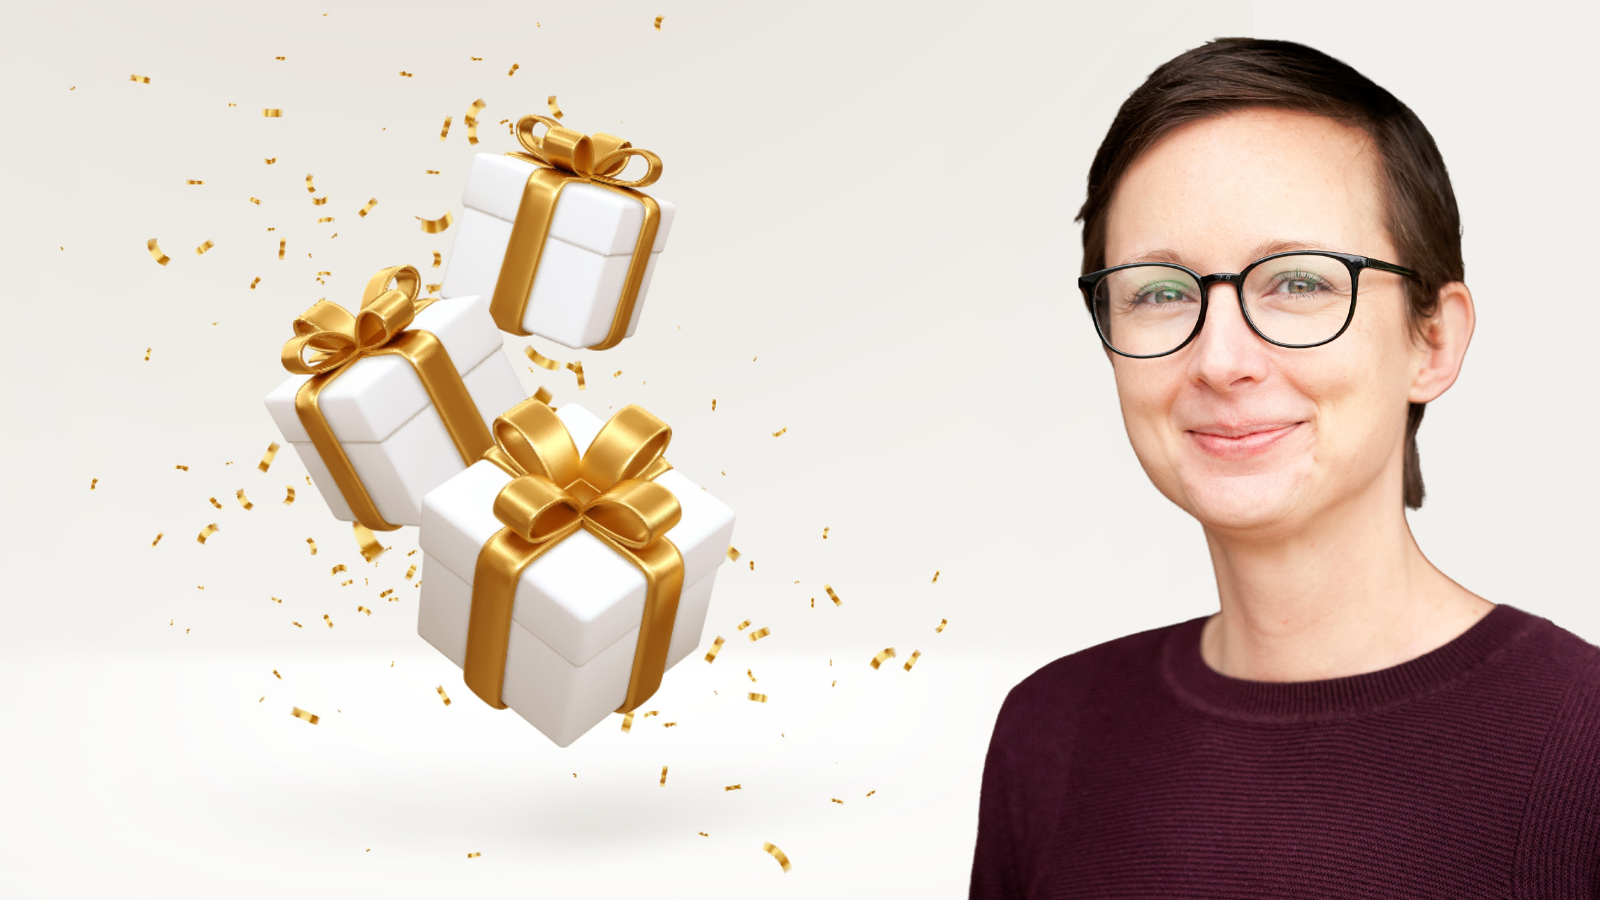 Give InKind's founder and CEO Laura Malcolm poses for a photo against a gift box background.